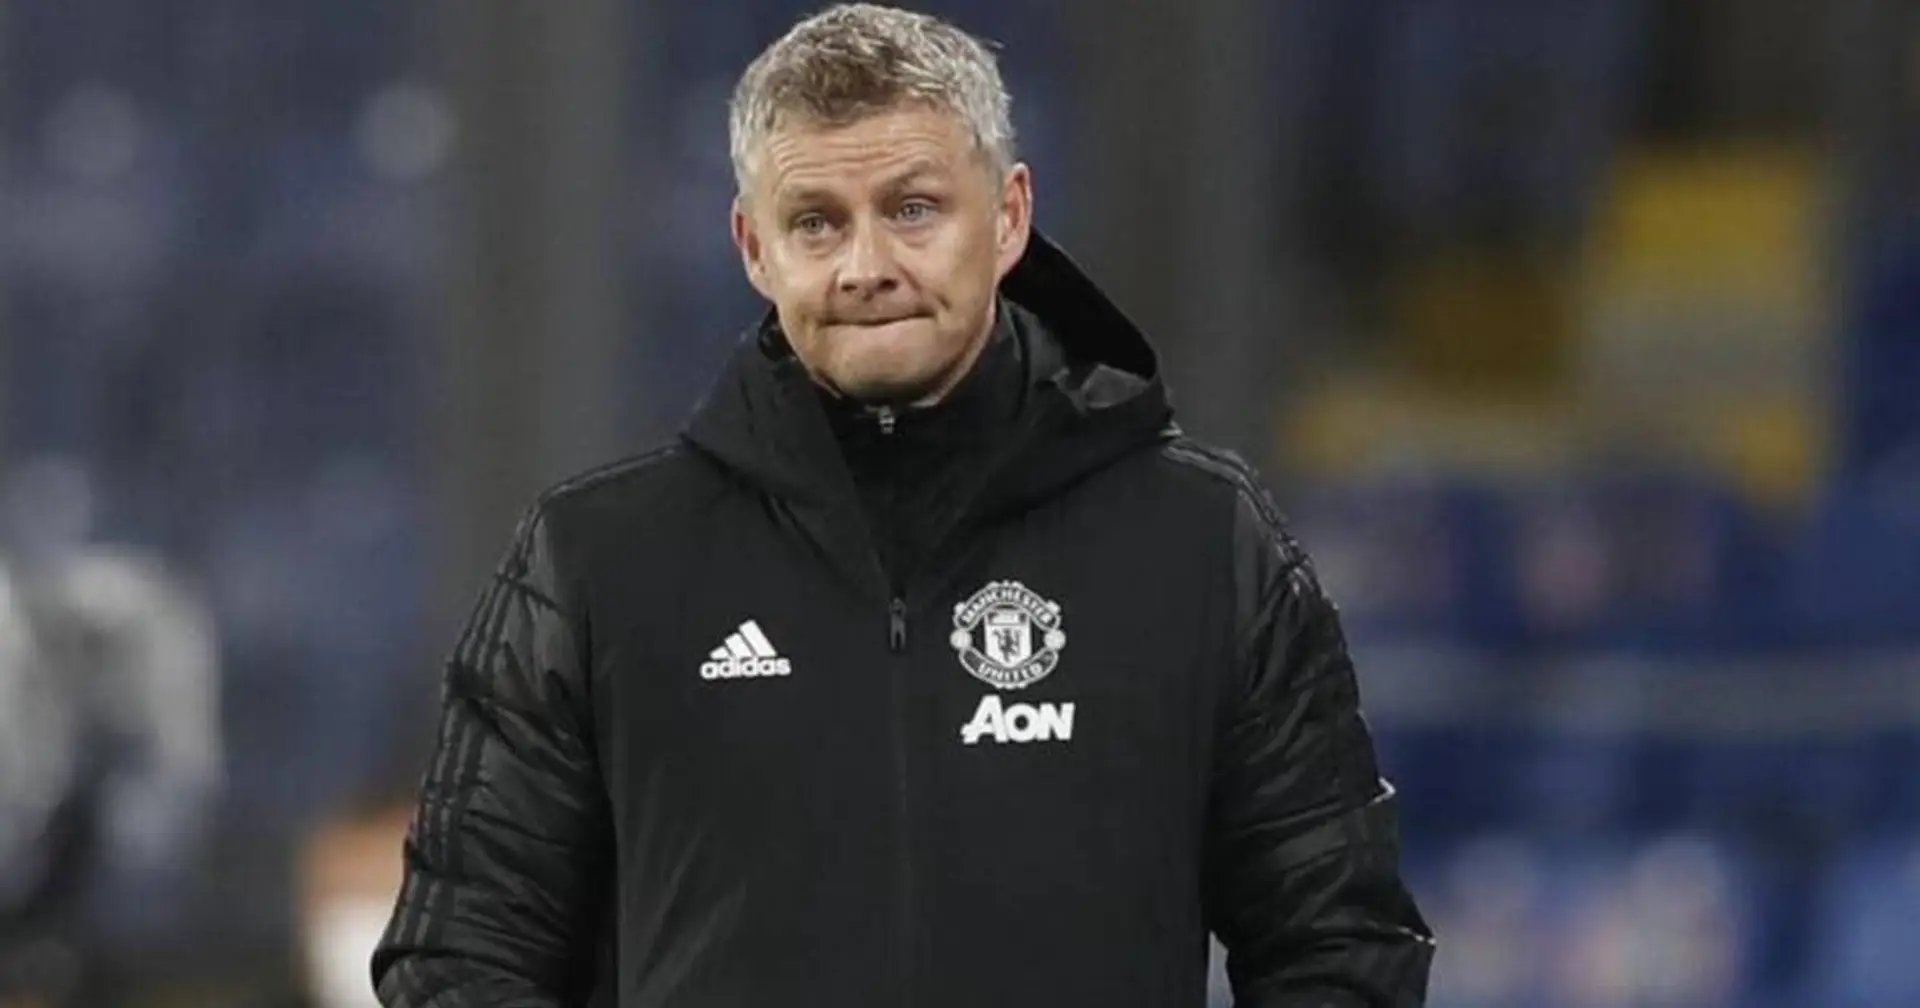 ‘There are opportunities we can’t say no to’: Solskjaer refuses to rule out more exits in January